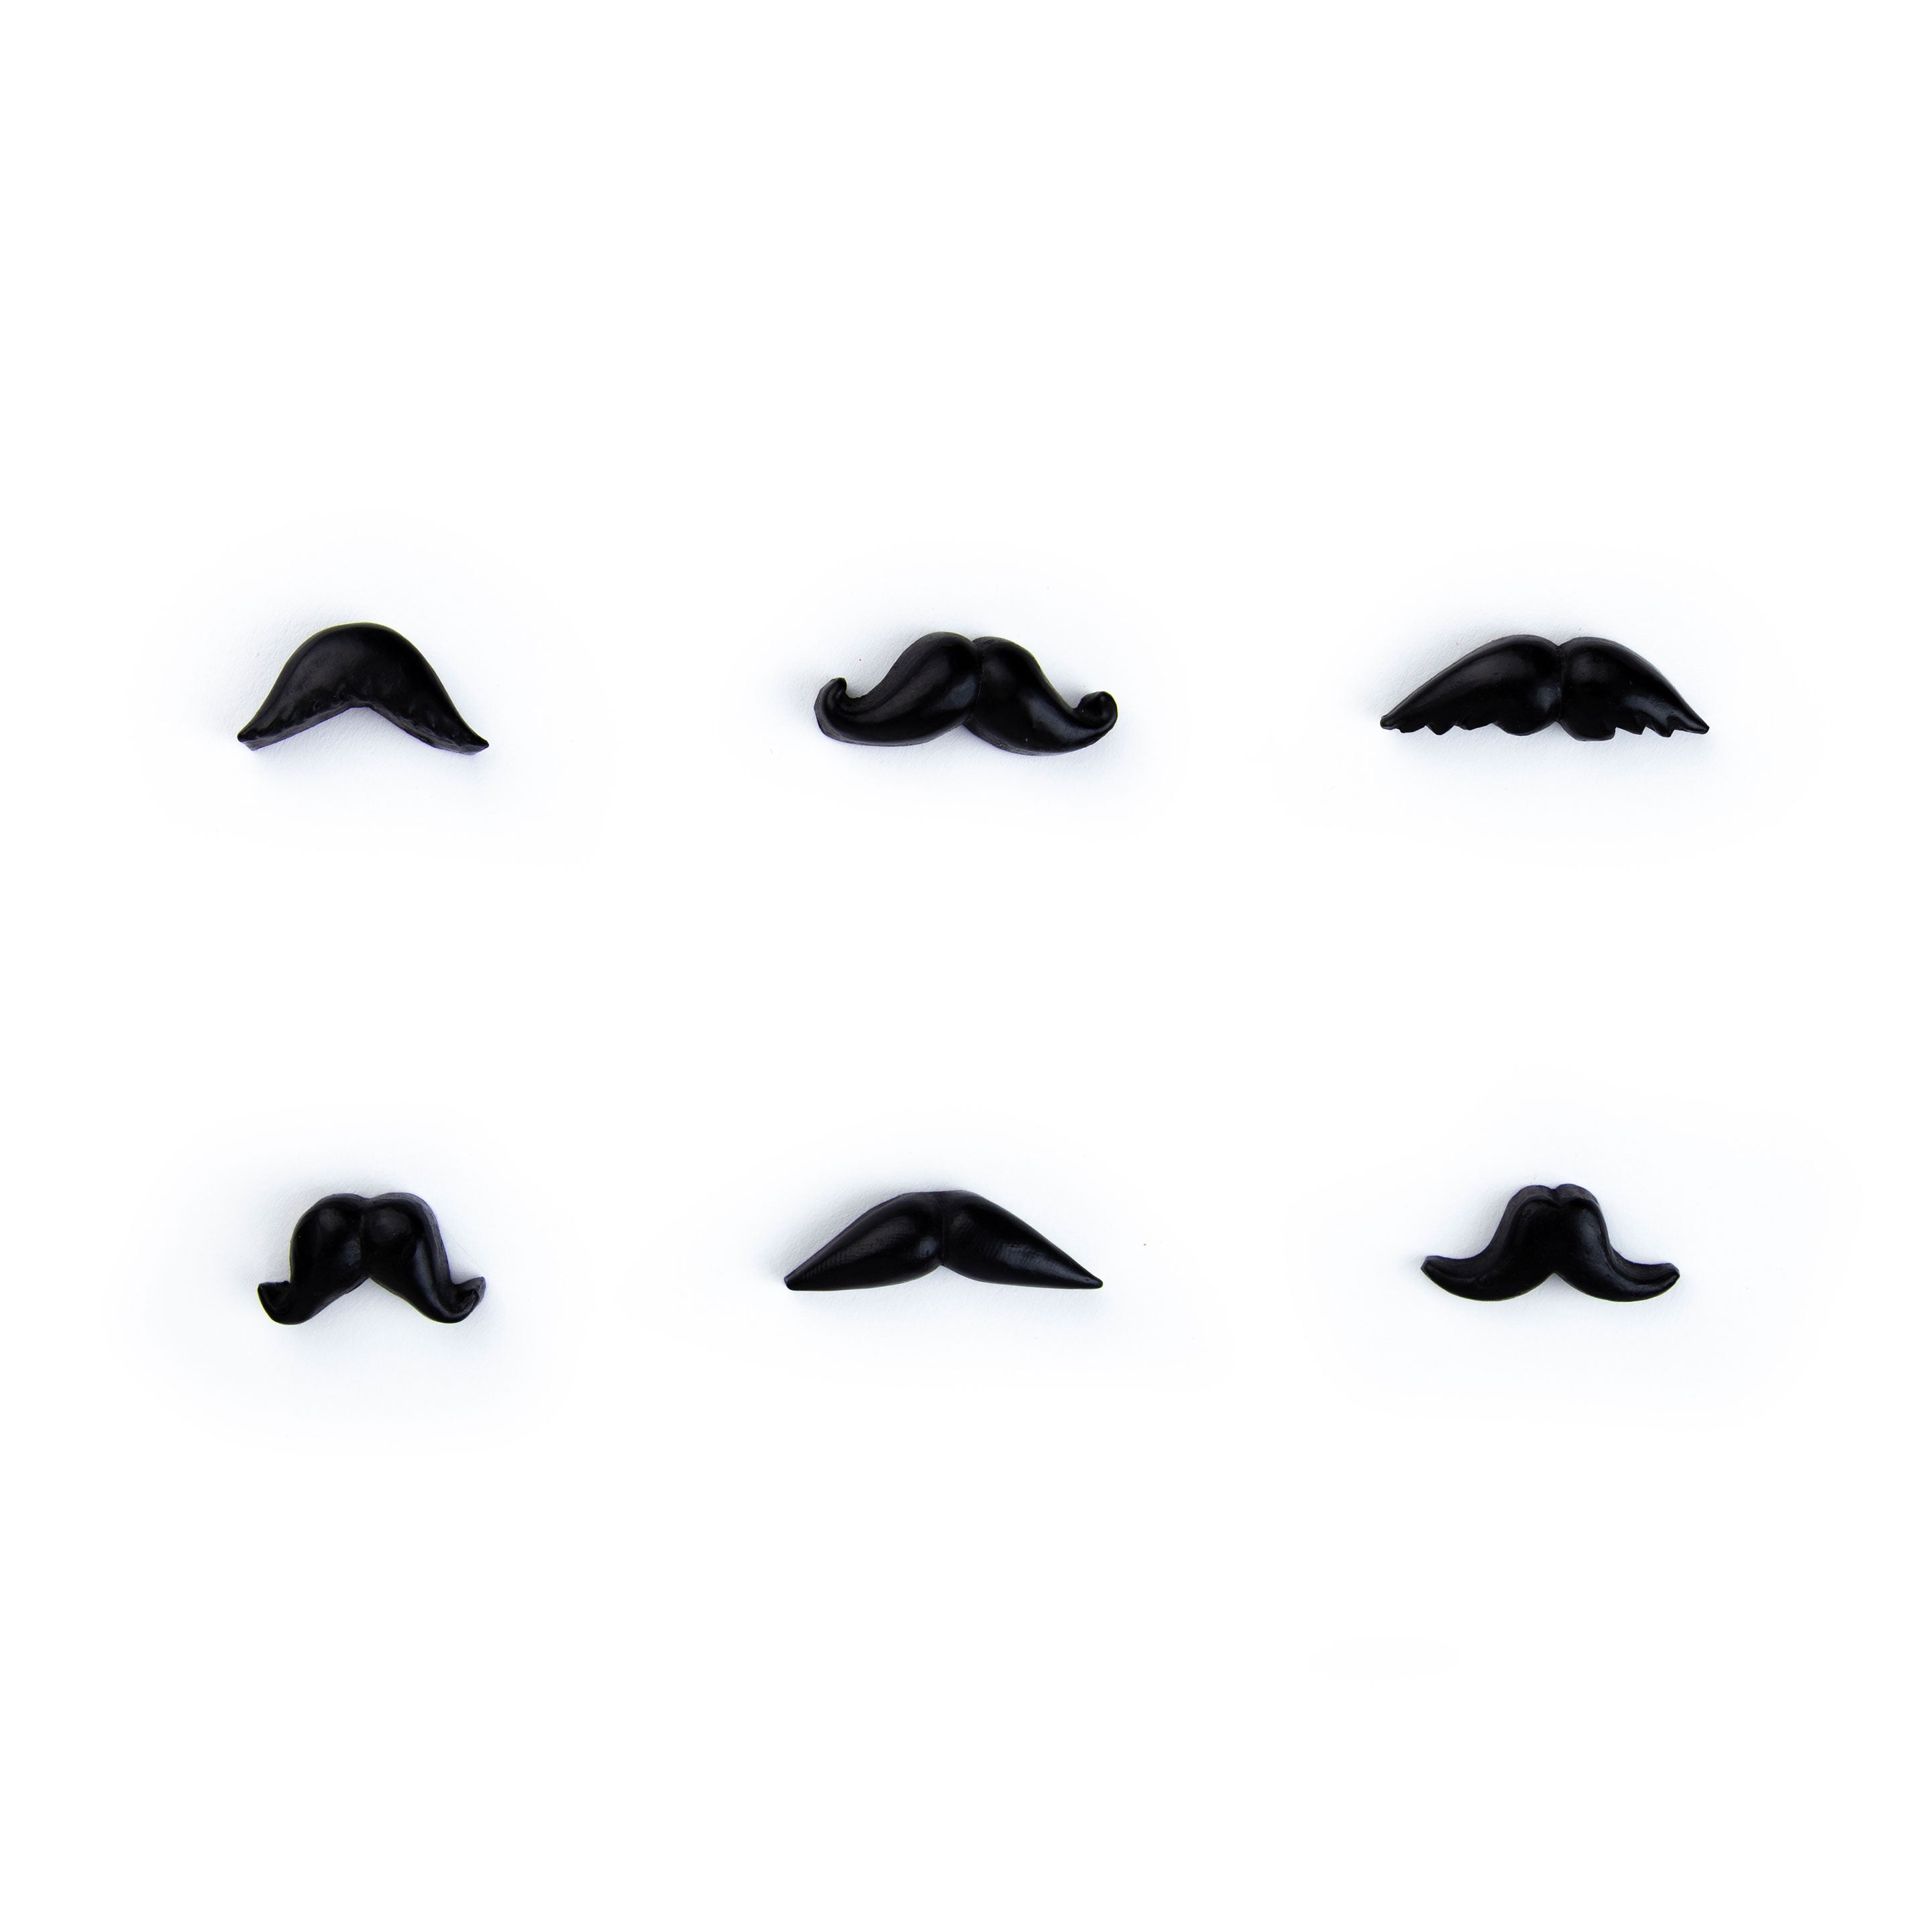 colorful MUSTACHE magnets s/6